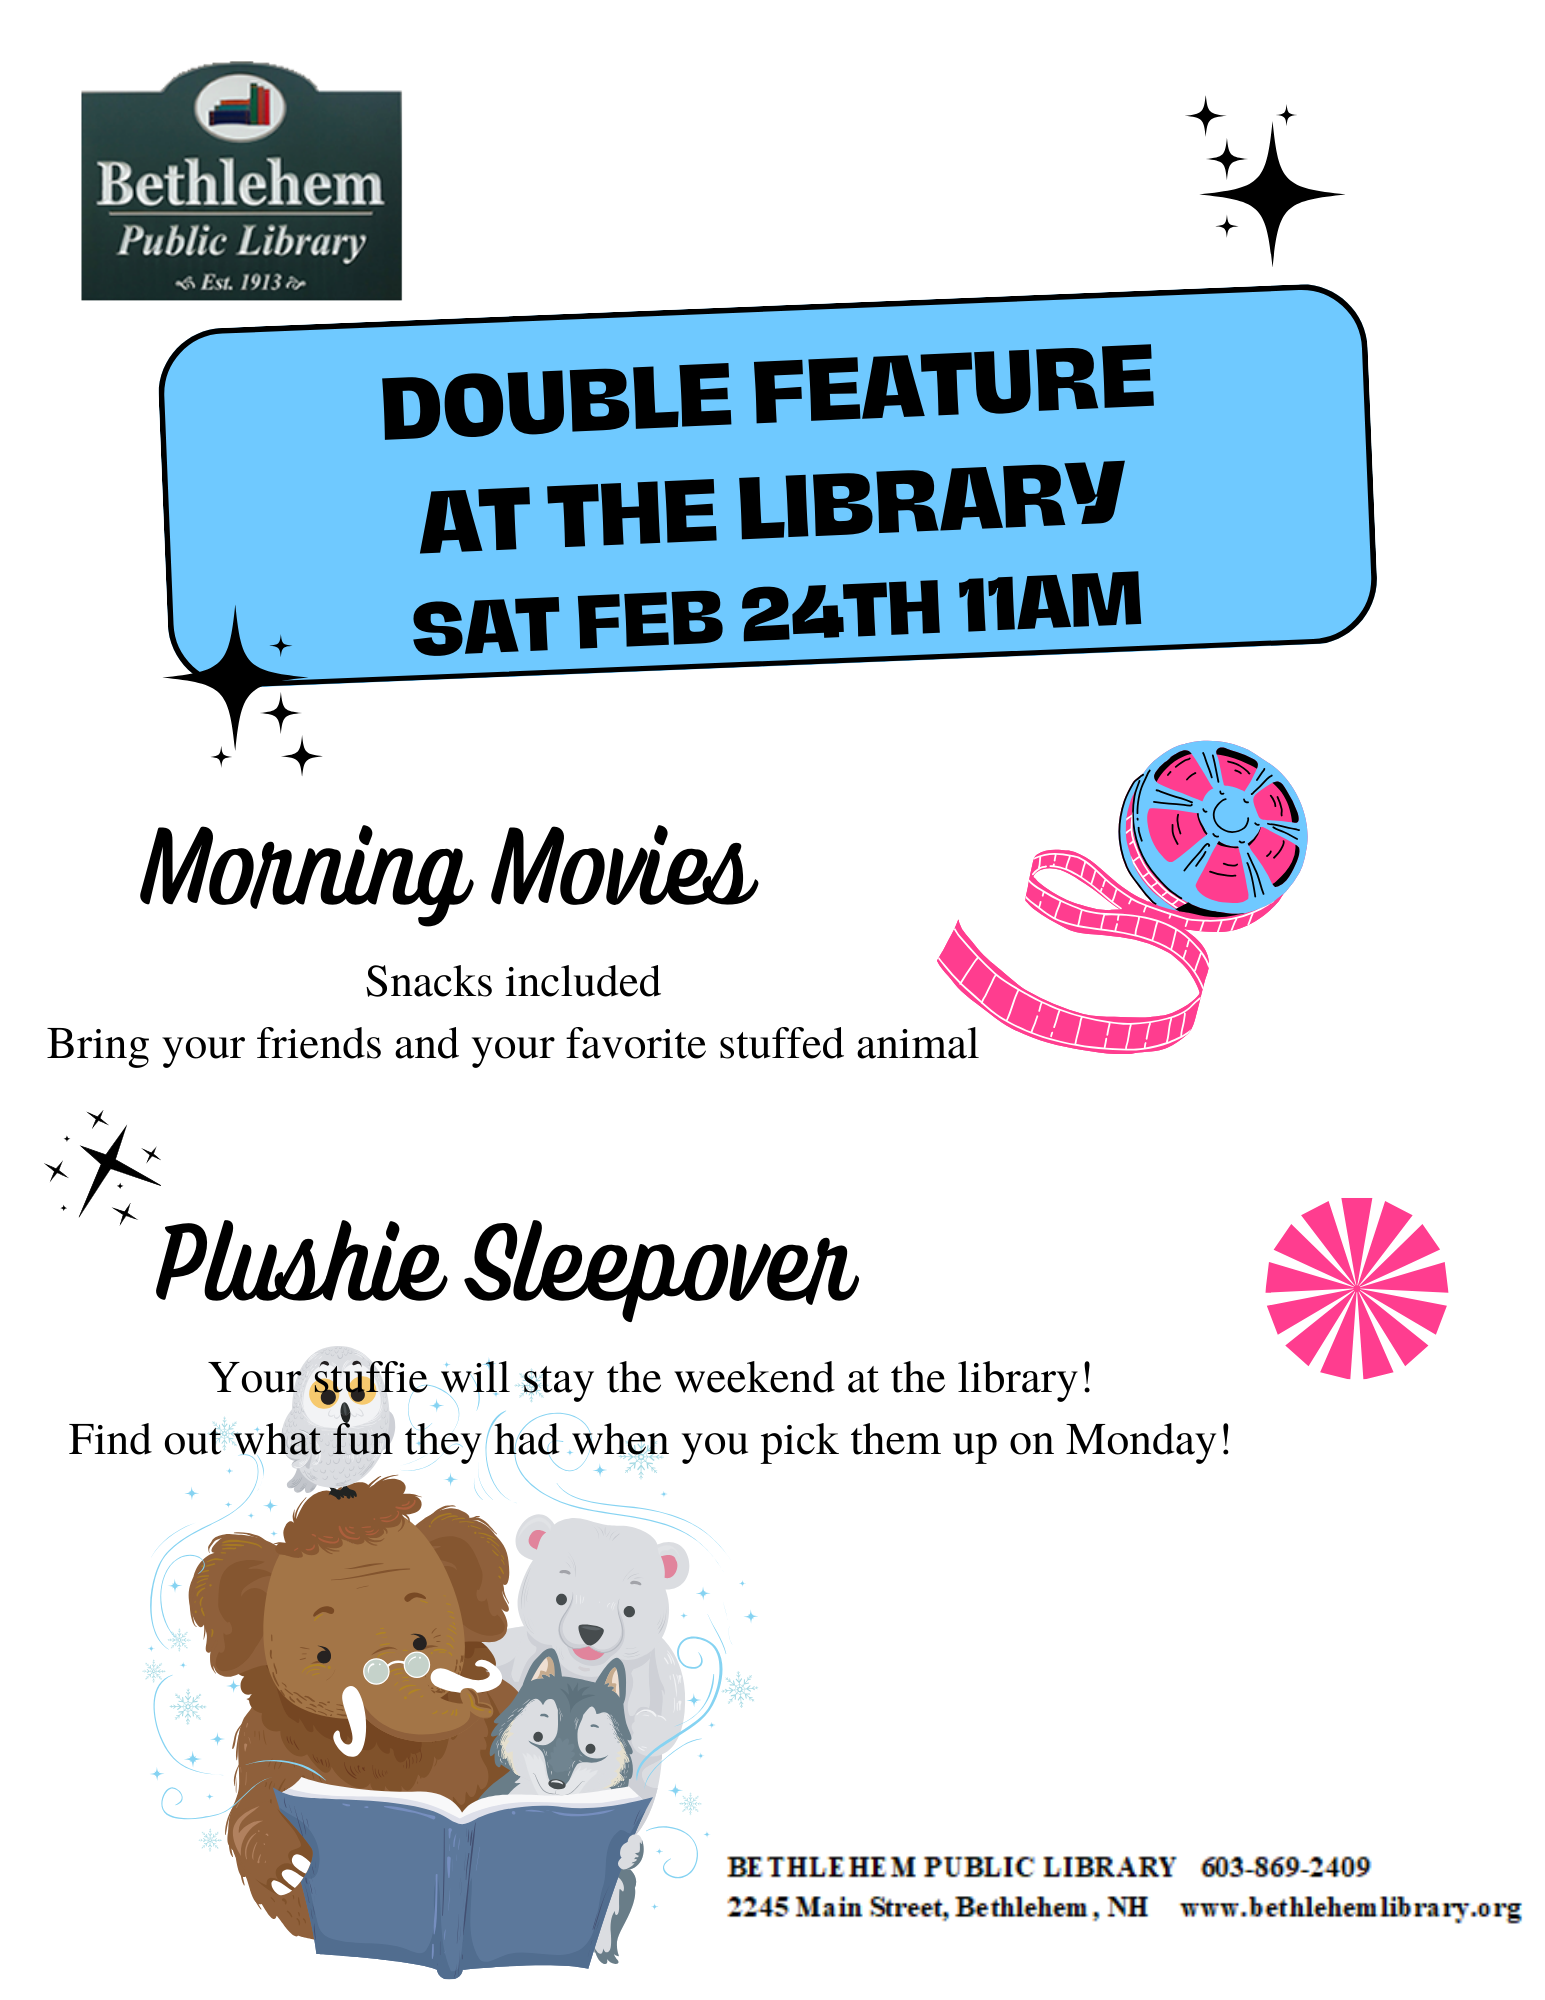 Double Feature  at the library Sat Feb 24th 11am.  Morning Movies Snacks included Bring your friends and your favorite stuffed animal.  Plushie Sleepover Your stuffie will stay the weekend at the library! Find out what fun they had when you pick them up on Monday!